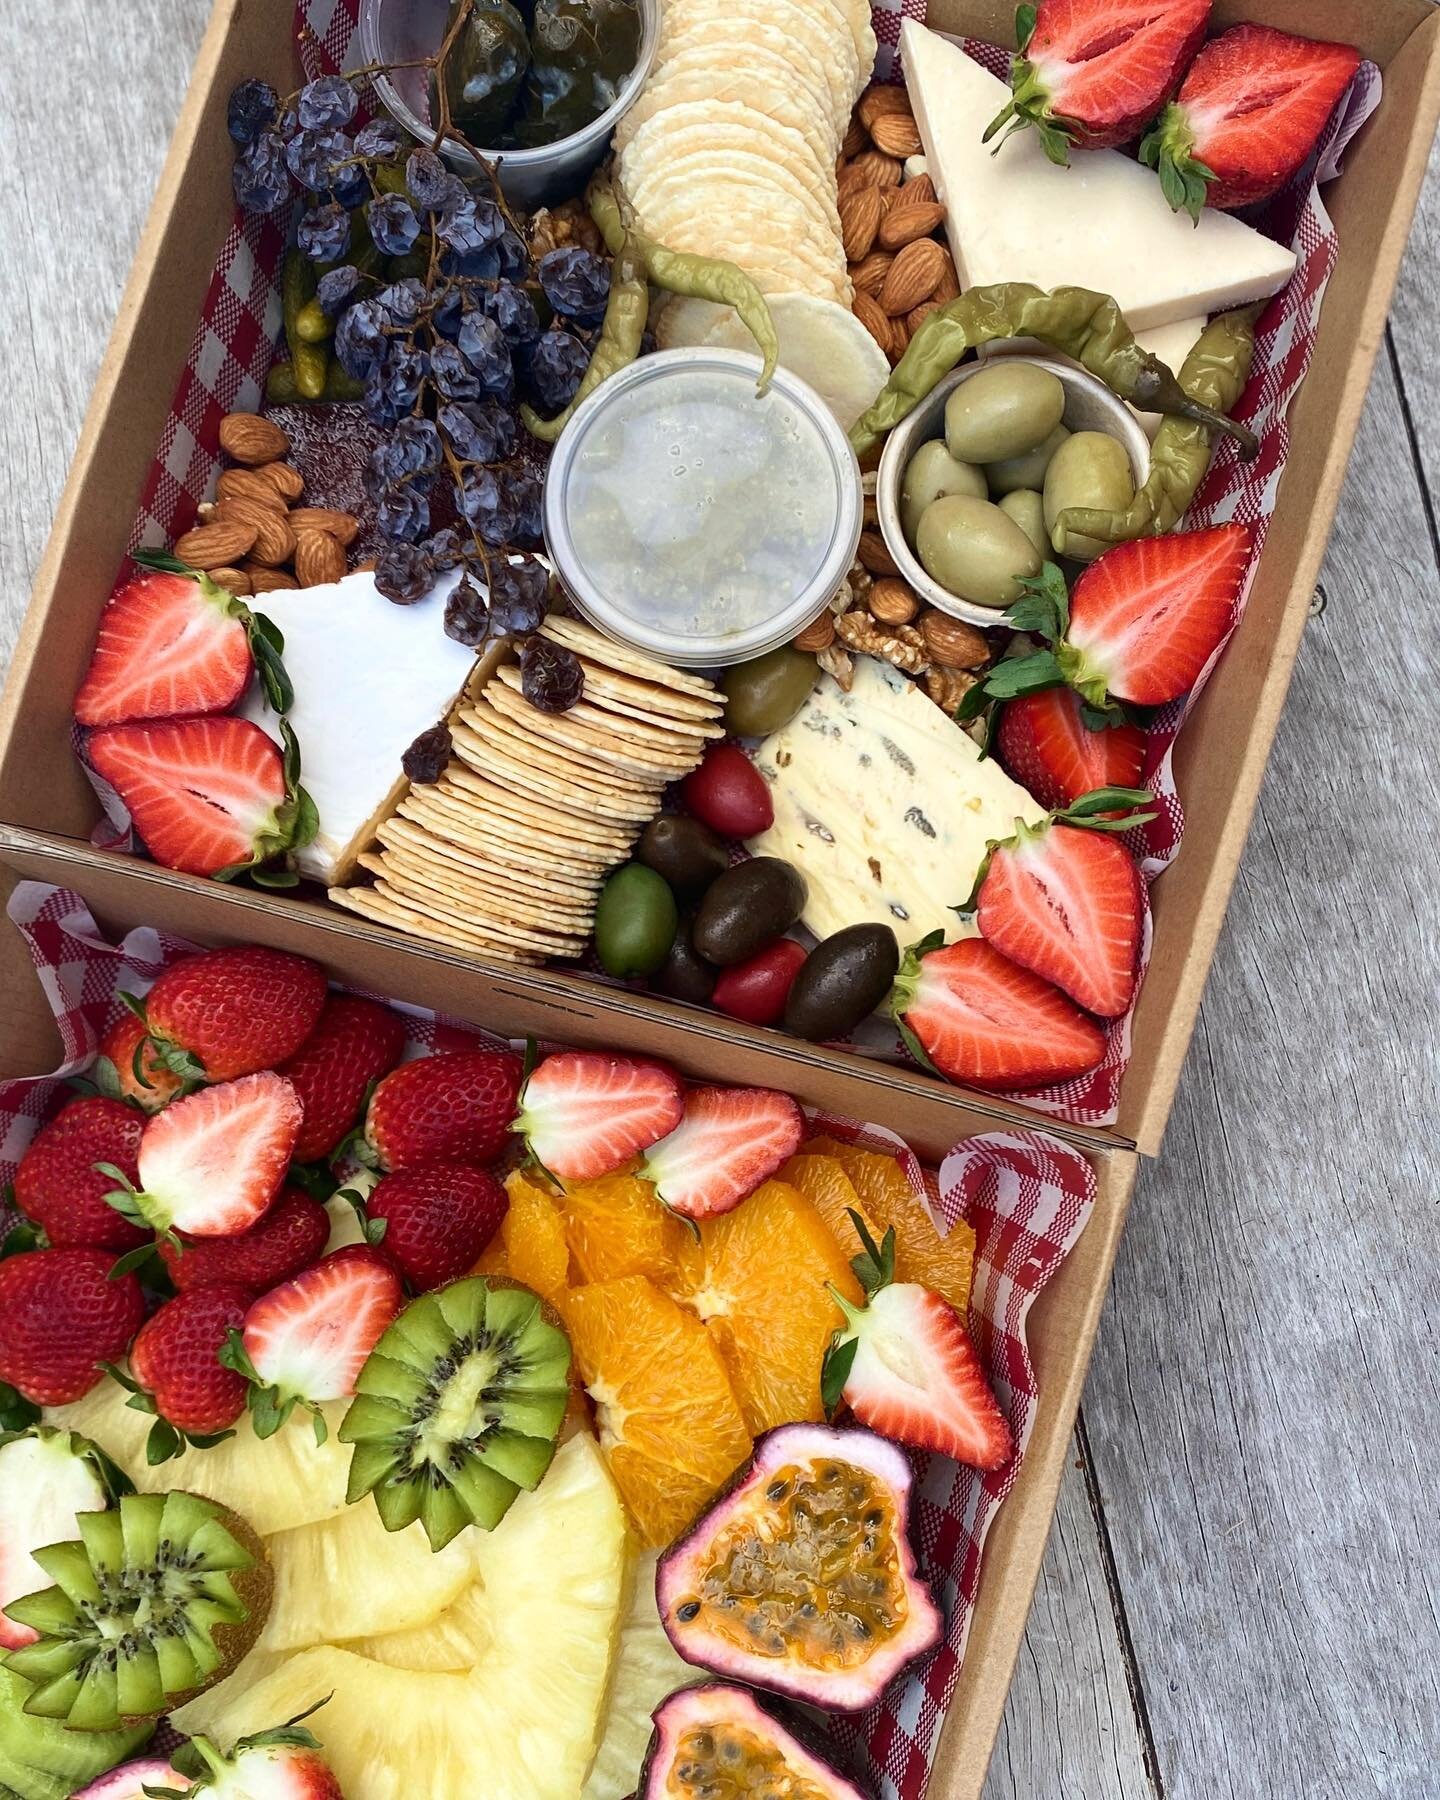 Sweet &amp; savoury.. which would you choose? 🧀🍓 Our customisable cheese &amp; fruit platters make the perfect gift, with something for everyone. Order on our website, pop in store or send us a DM.